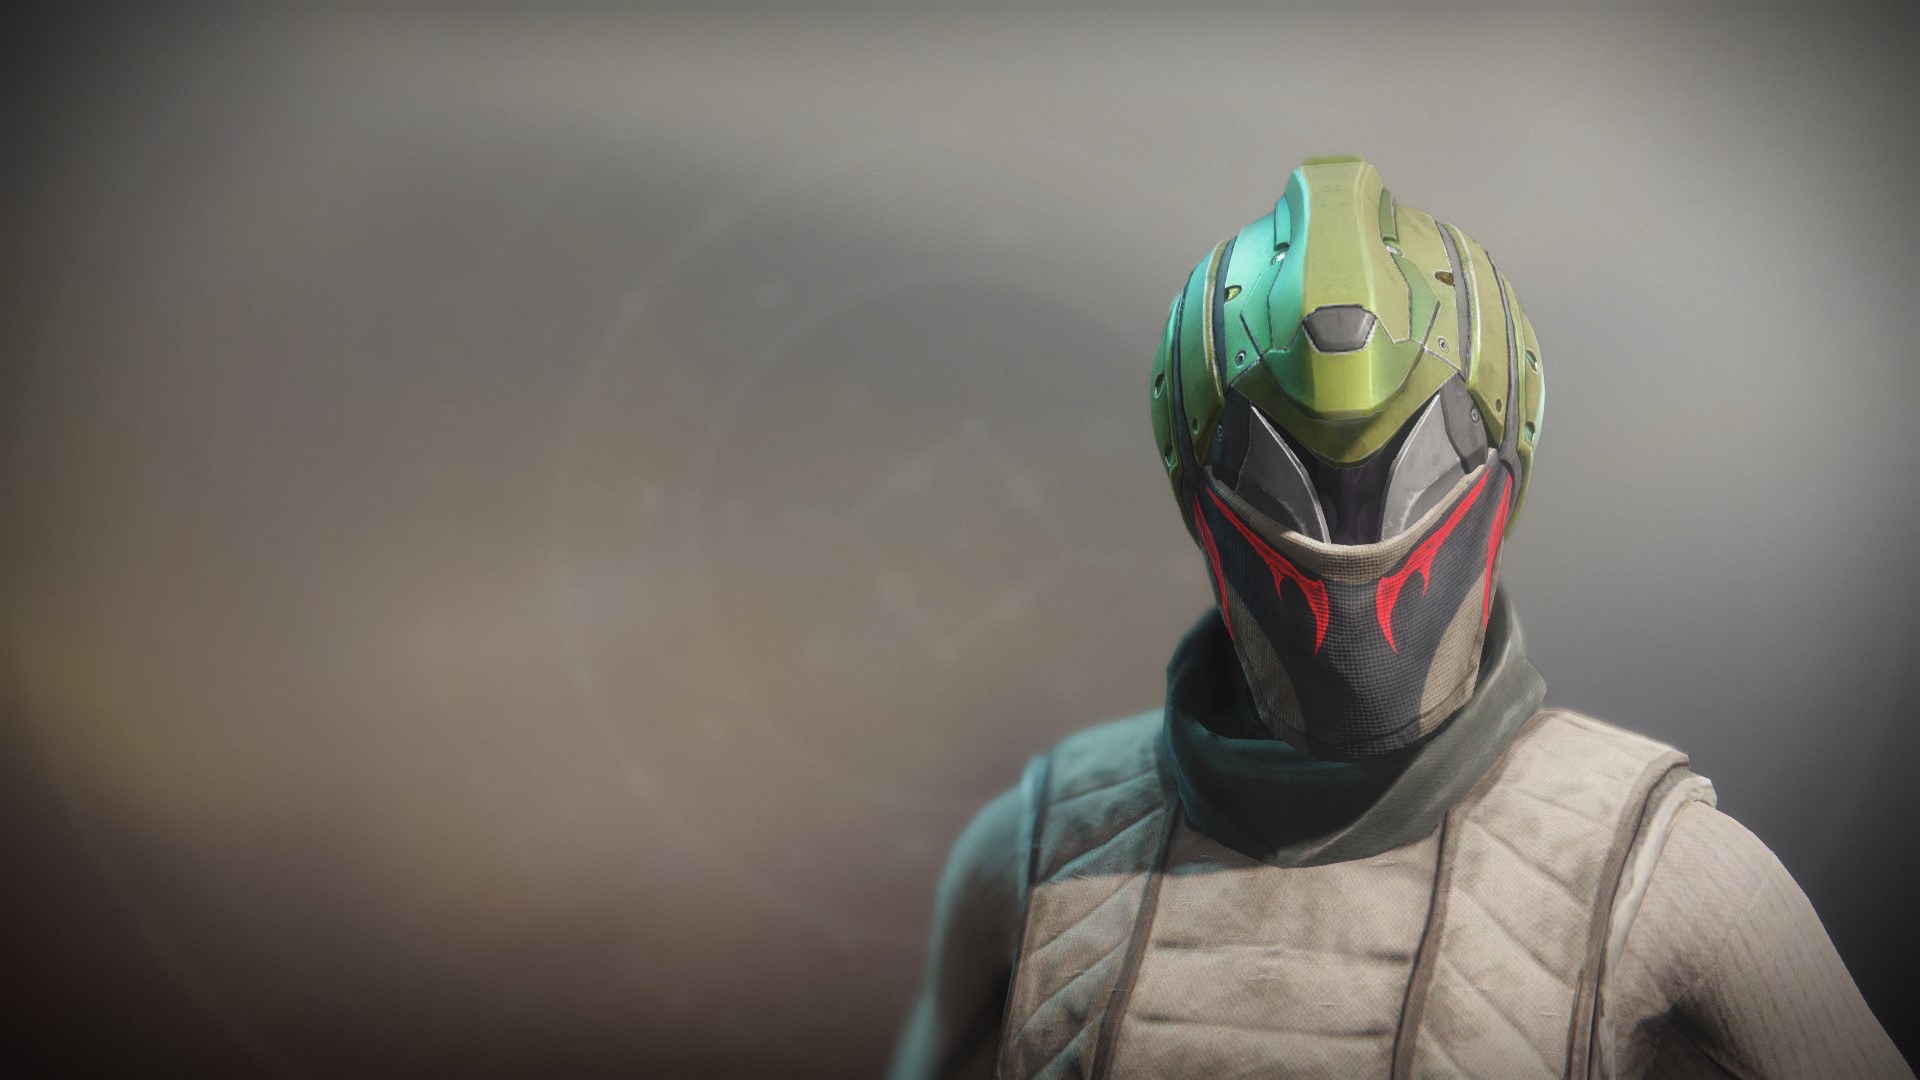 An in-game render of the Notorious Invader Hood.